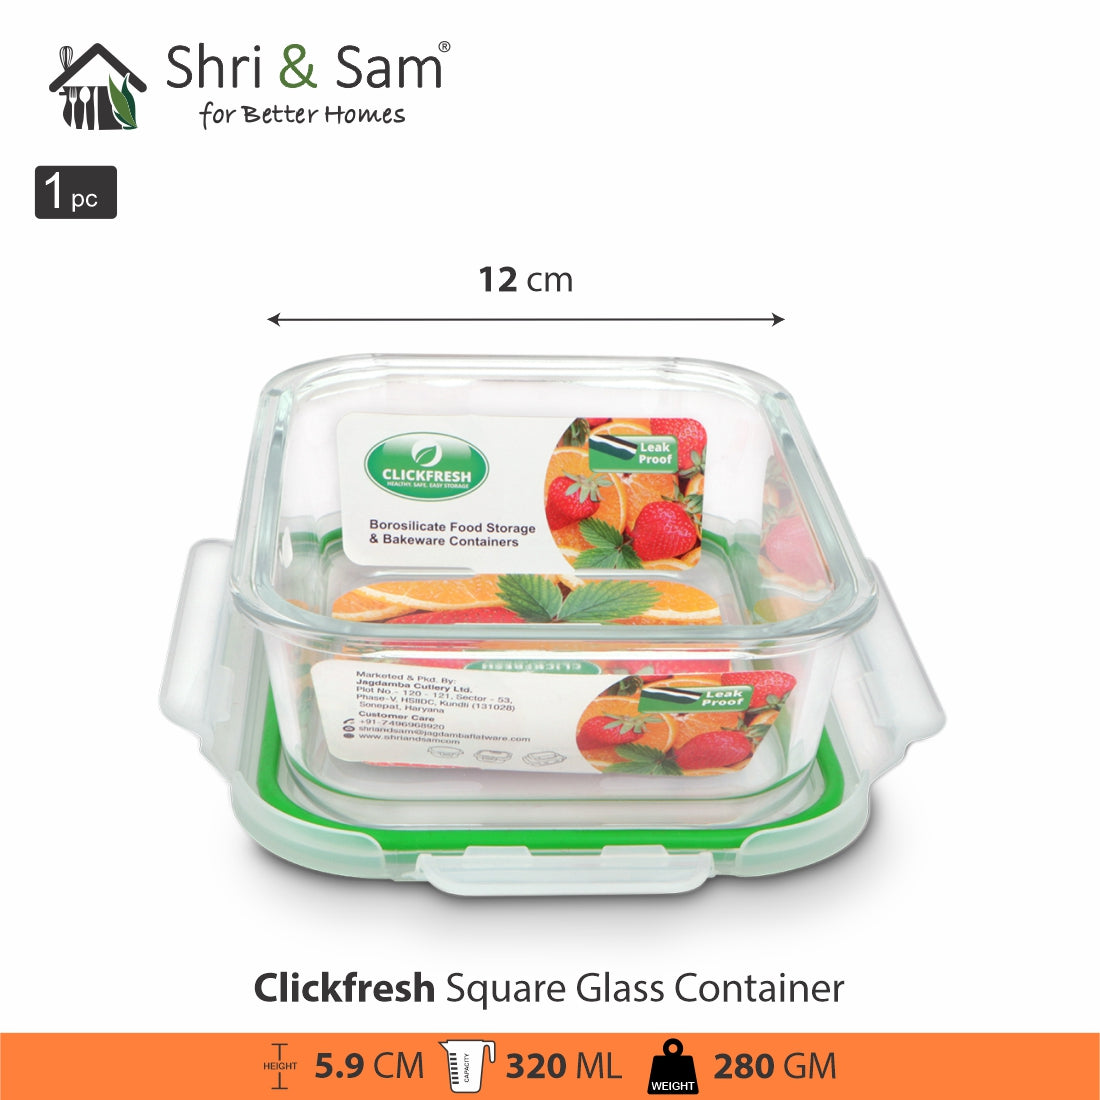 Glass 320ml Food Storage & Bakeware Container with Airtight Lid Square Clickfresh